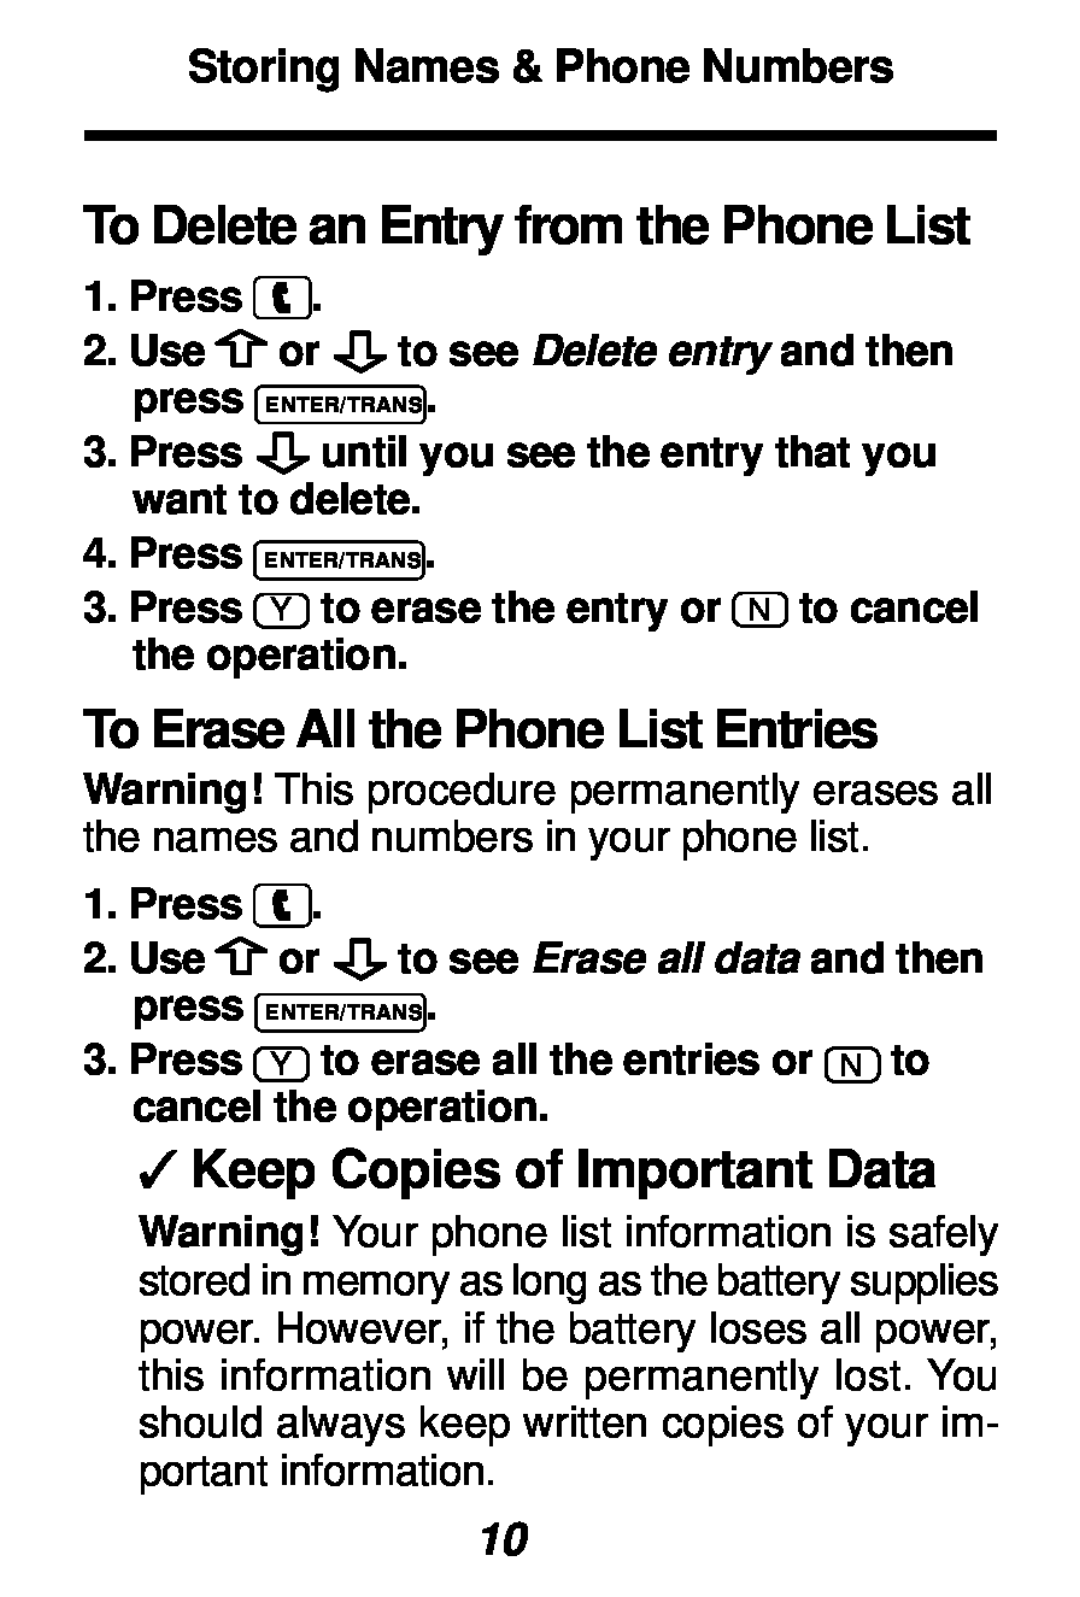 Franklin TES-106 manual To Erase All the Phone List Entries, Keep Copies of Important Data, Storing Names & Phone Numbers 